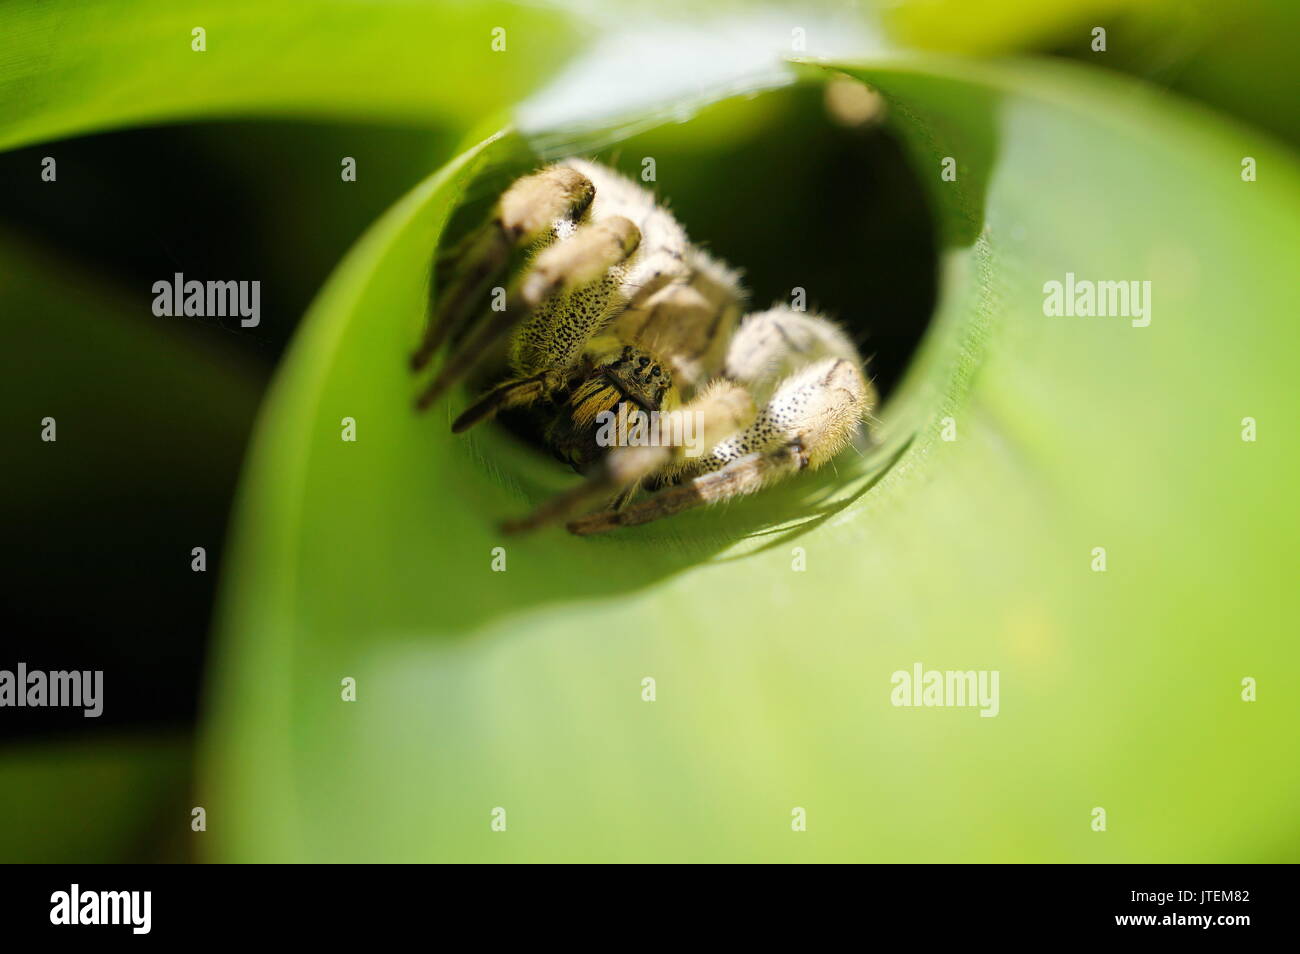 A wandering spider hidden in a leaf, Costa Rica, Central America Stock Photo